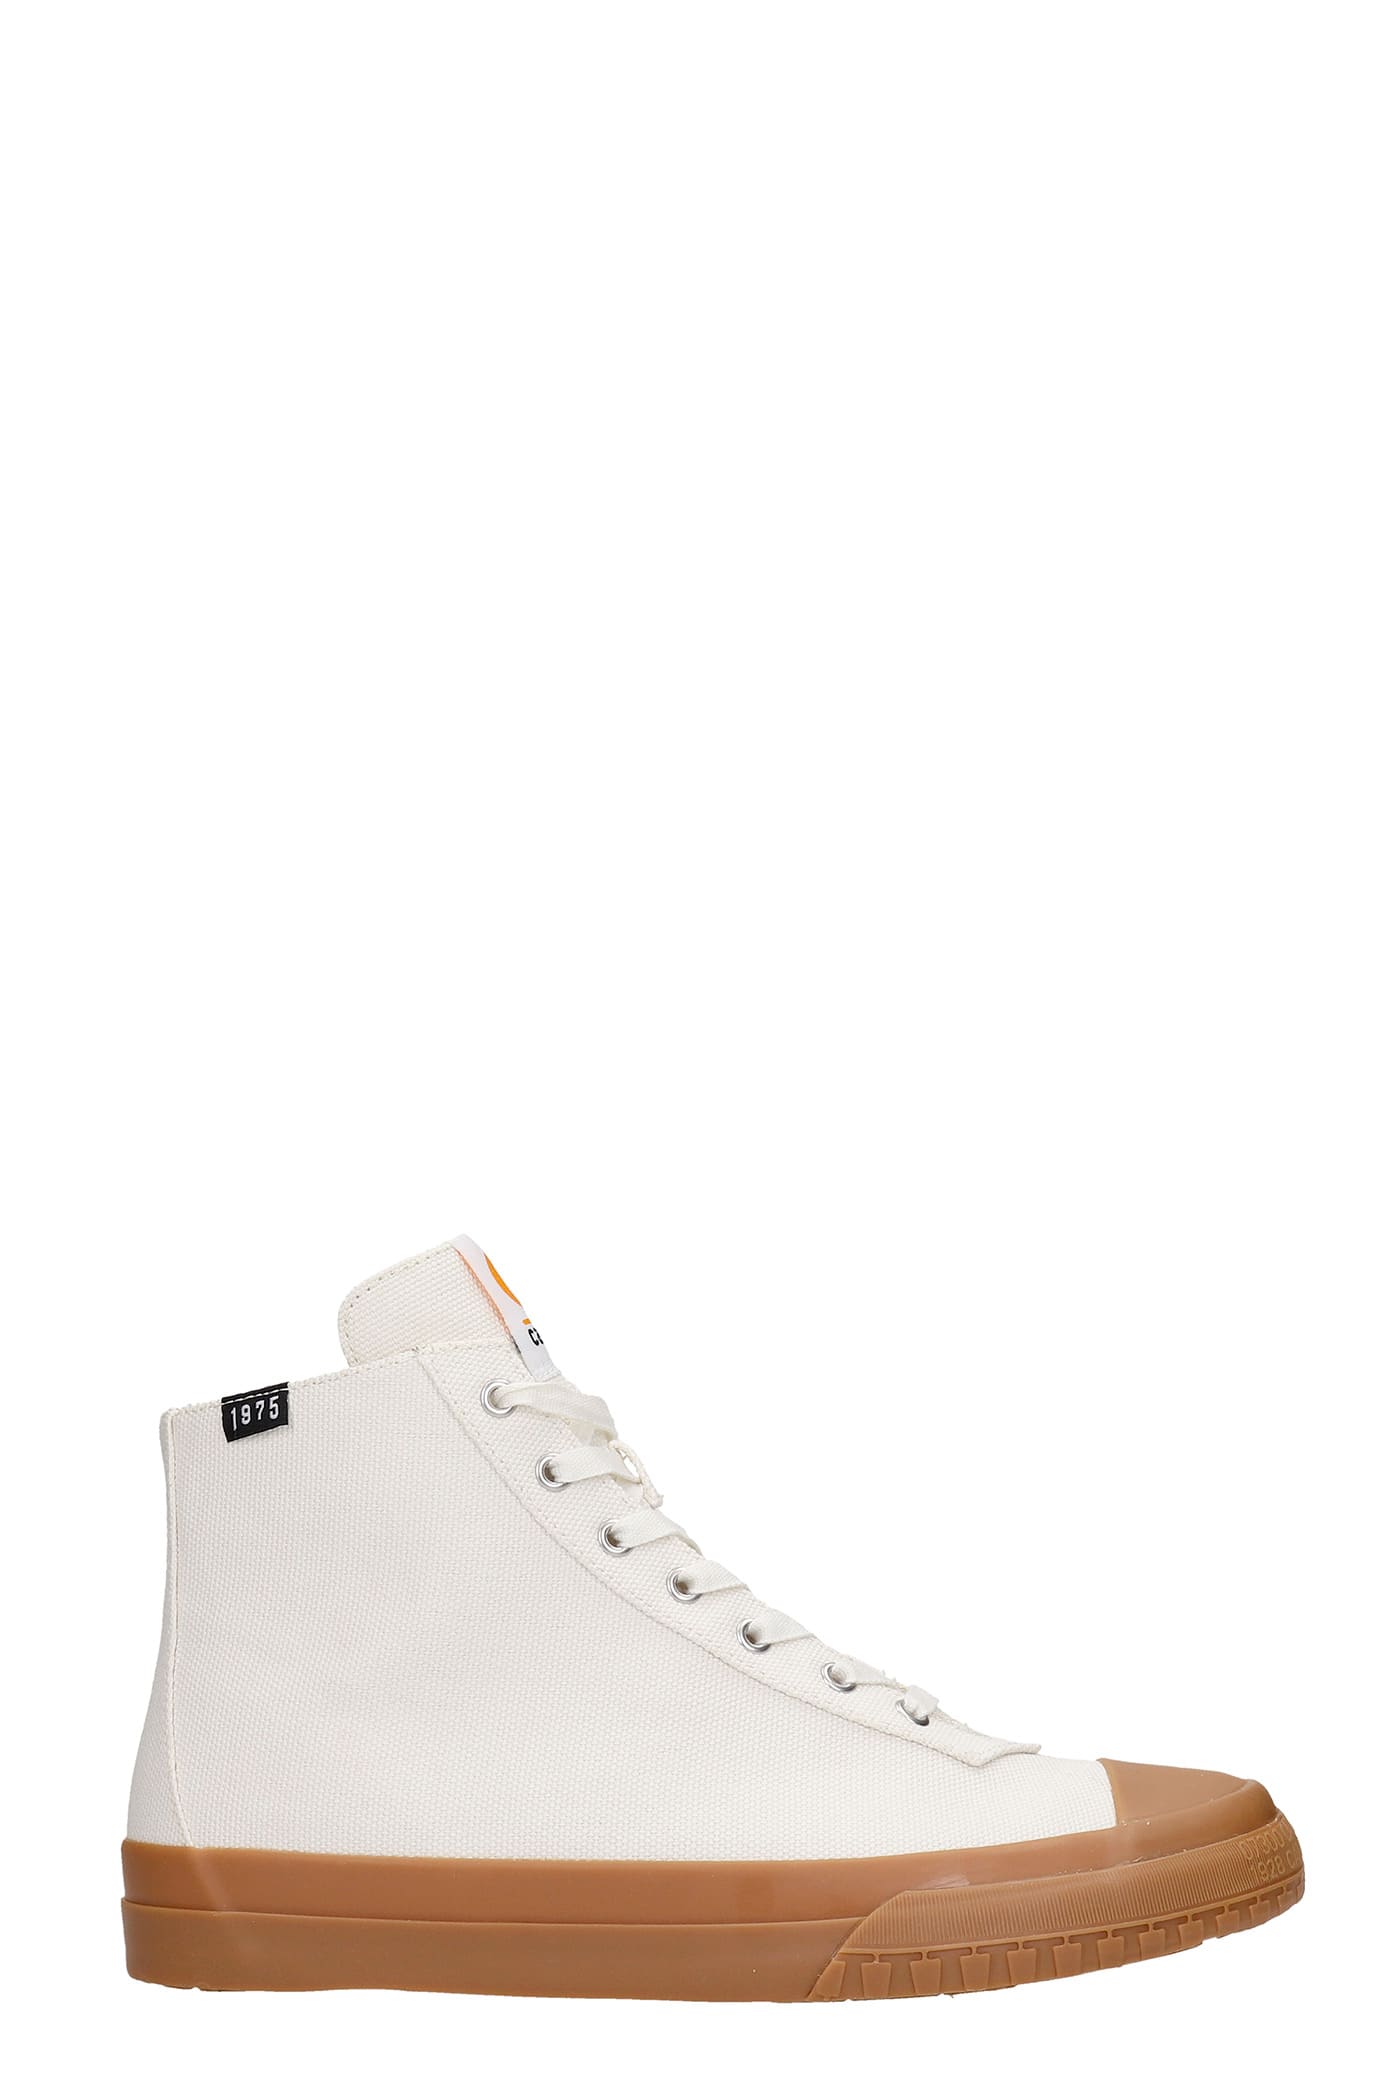 Camper Camaleon Sneakers In White Canvas